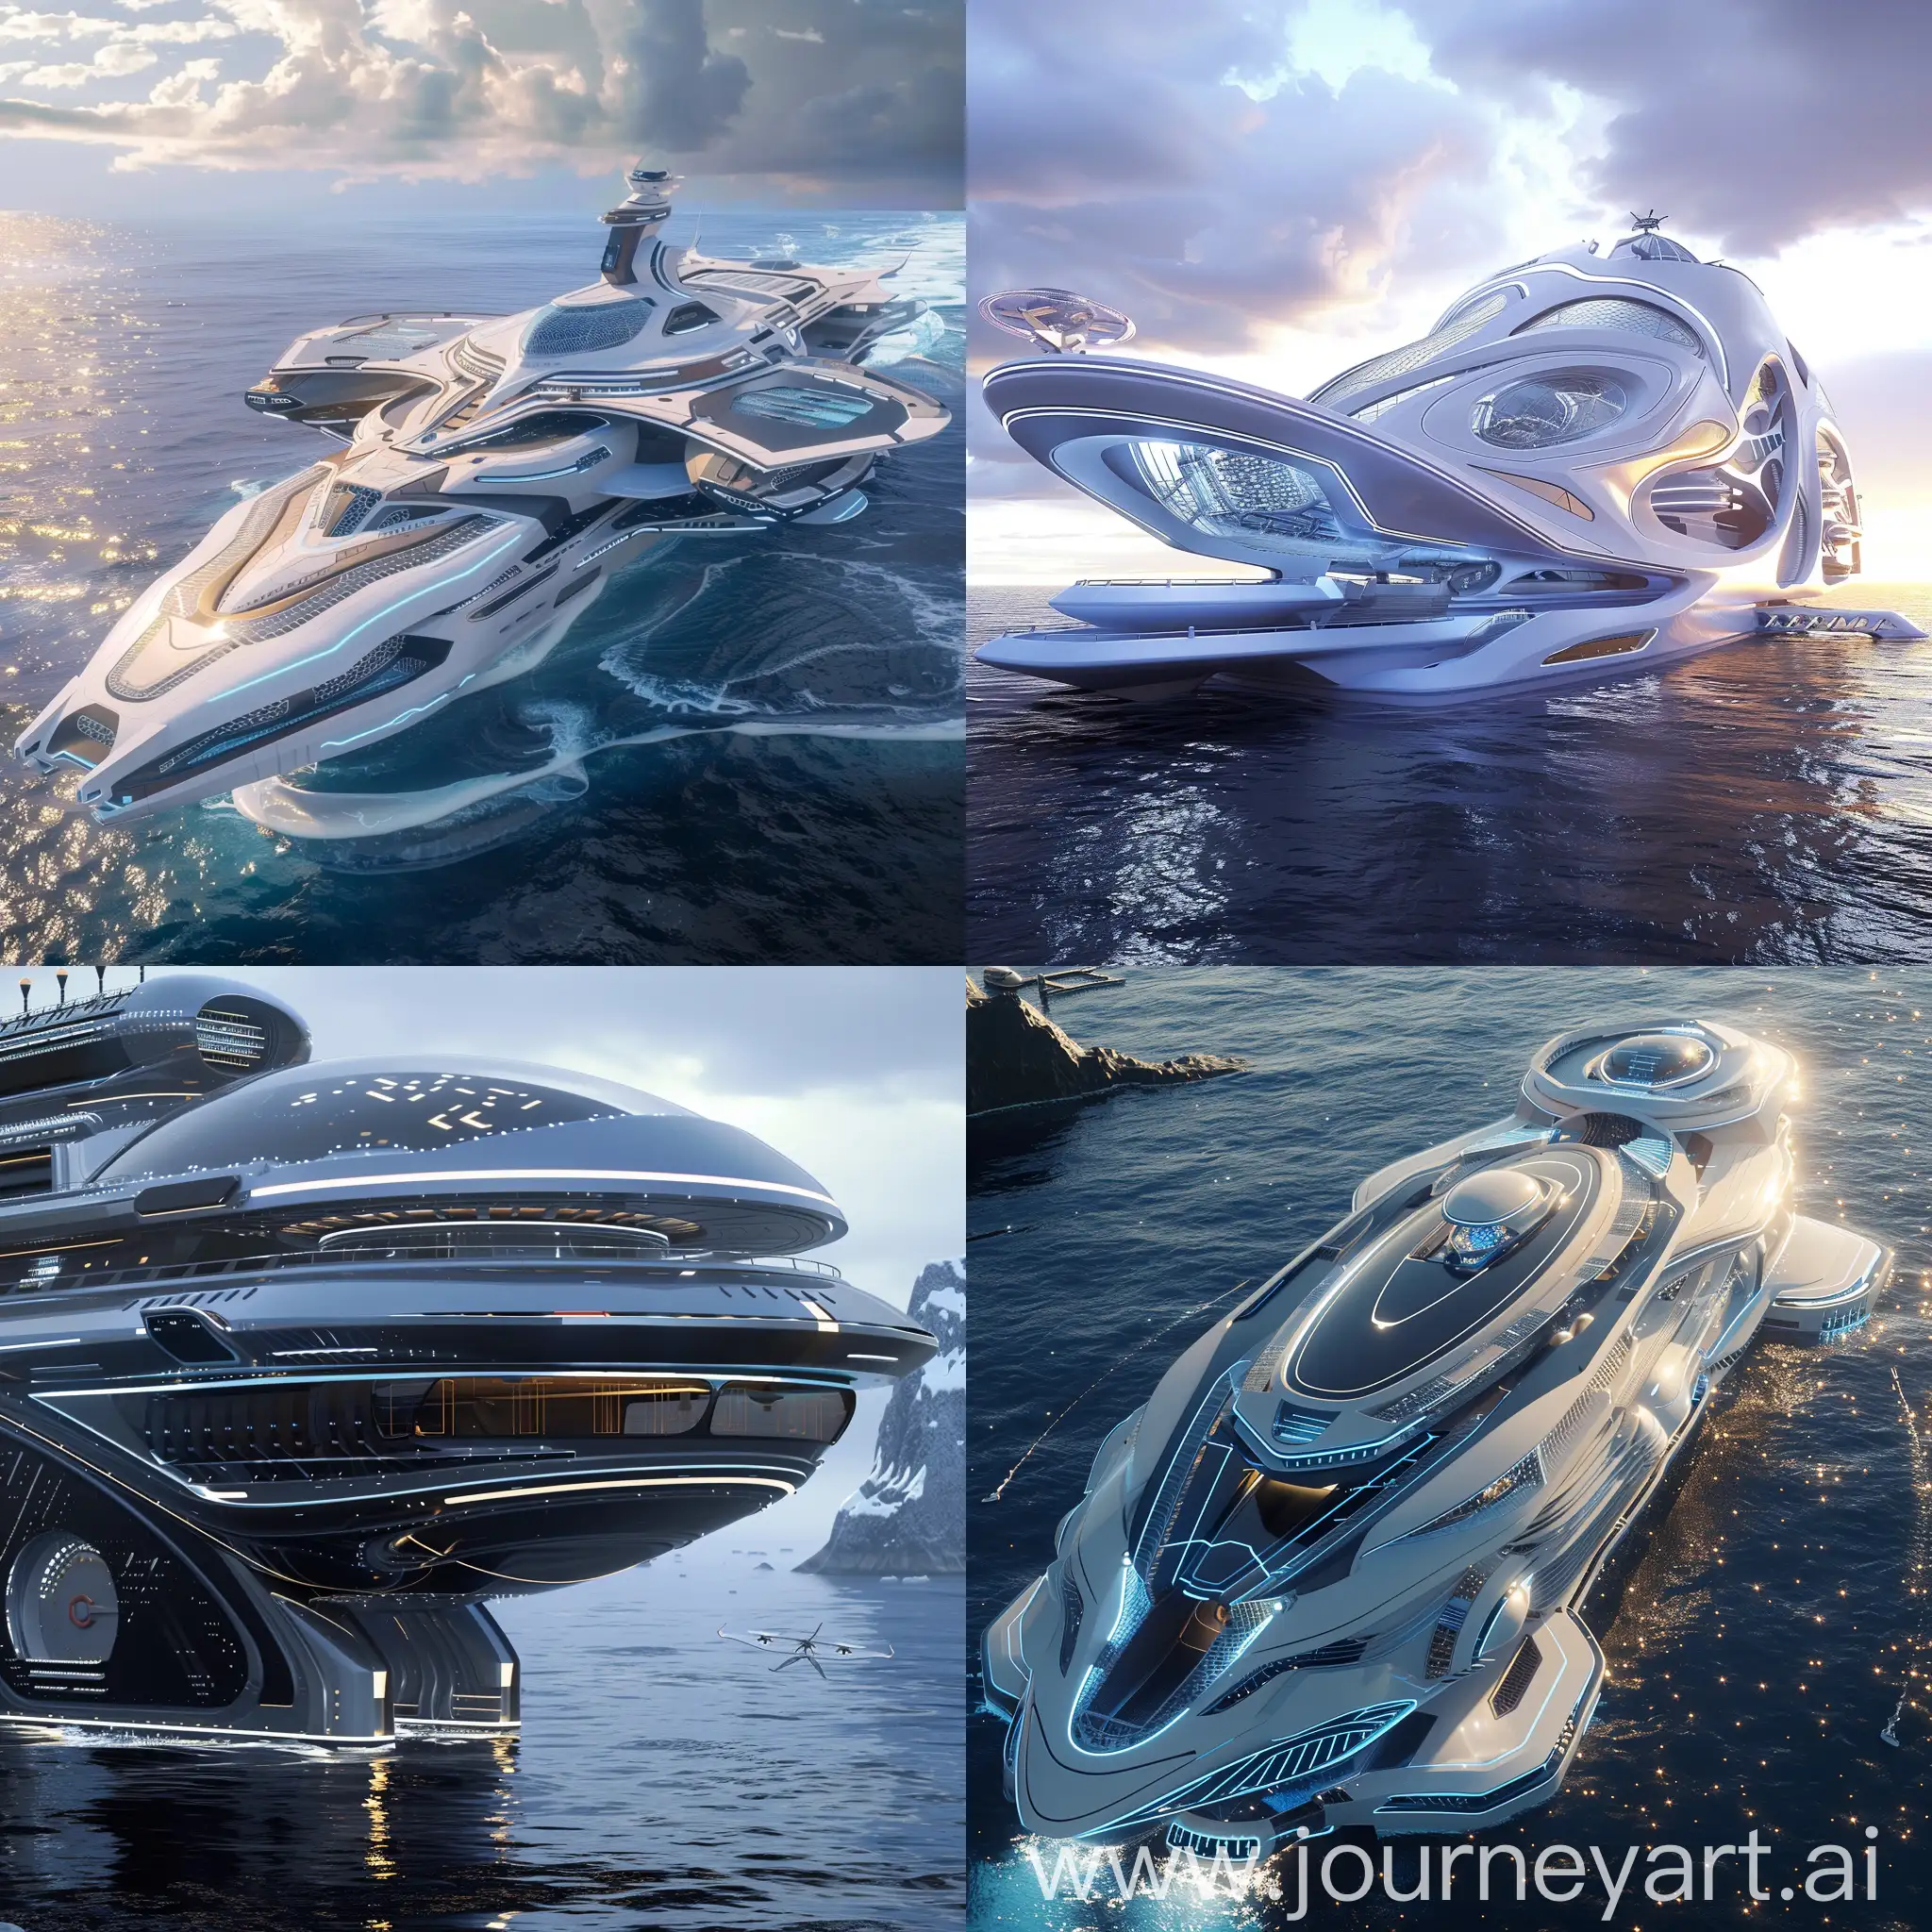 Advanced-SciFi-Cruise-Ship-with-EnergyEfficient-Propulsion-Systems-and-AIIntegrated-Navigation